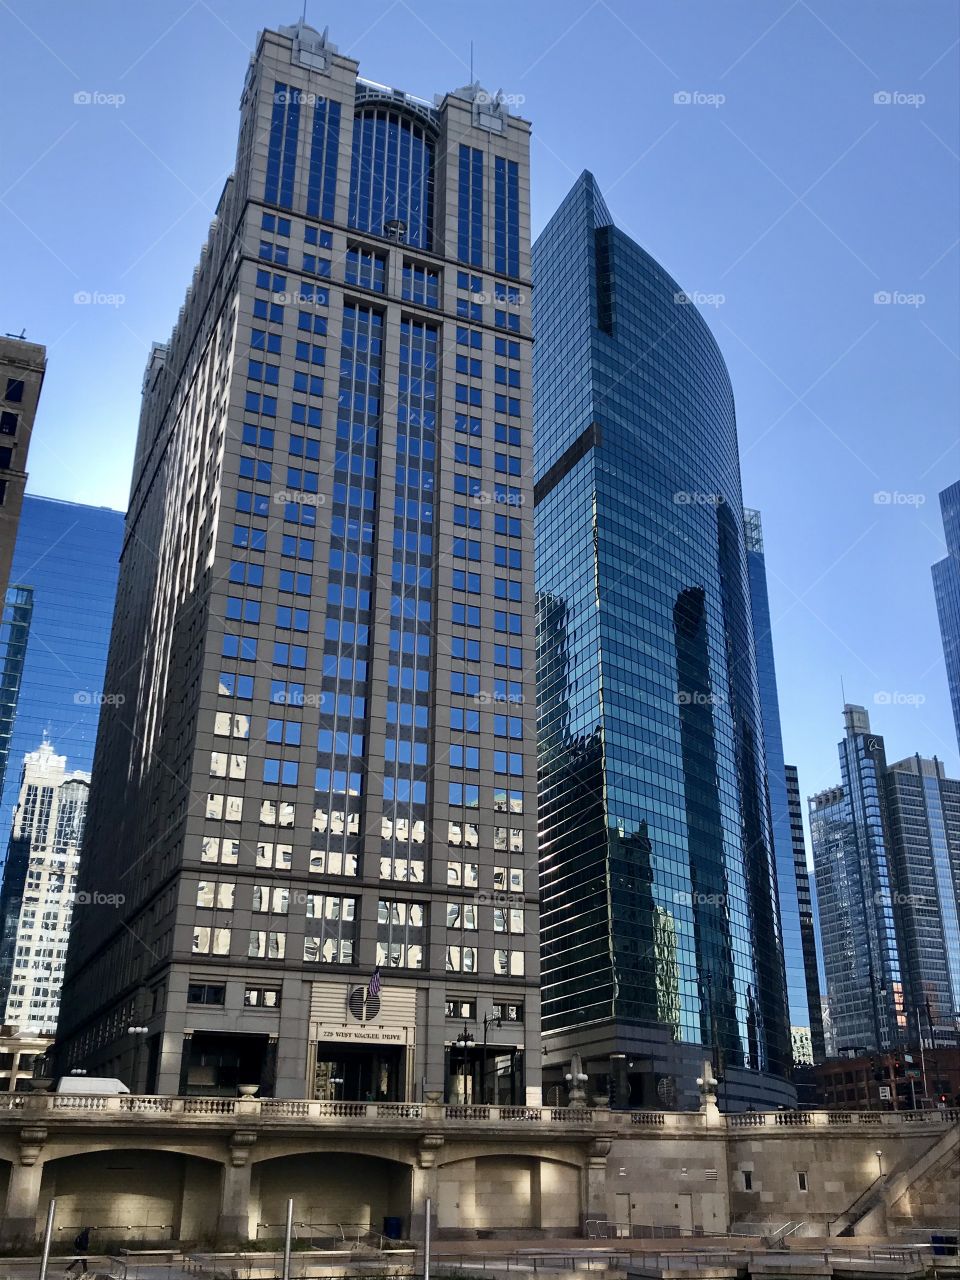 Cluster of skyscrapers along the picturesque Chicago riverfront in Chicago, Illinois